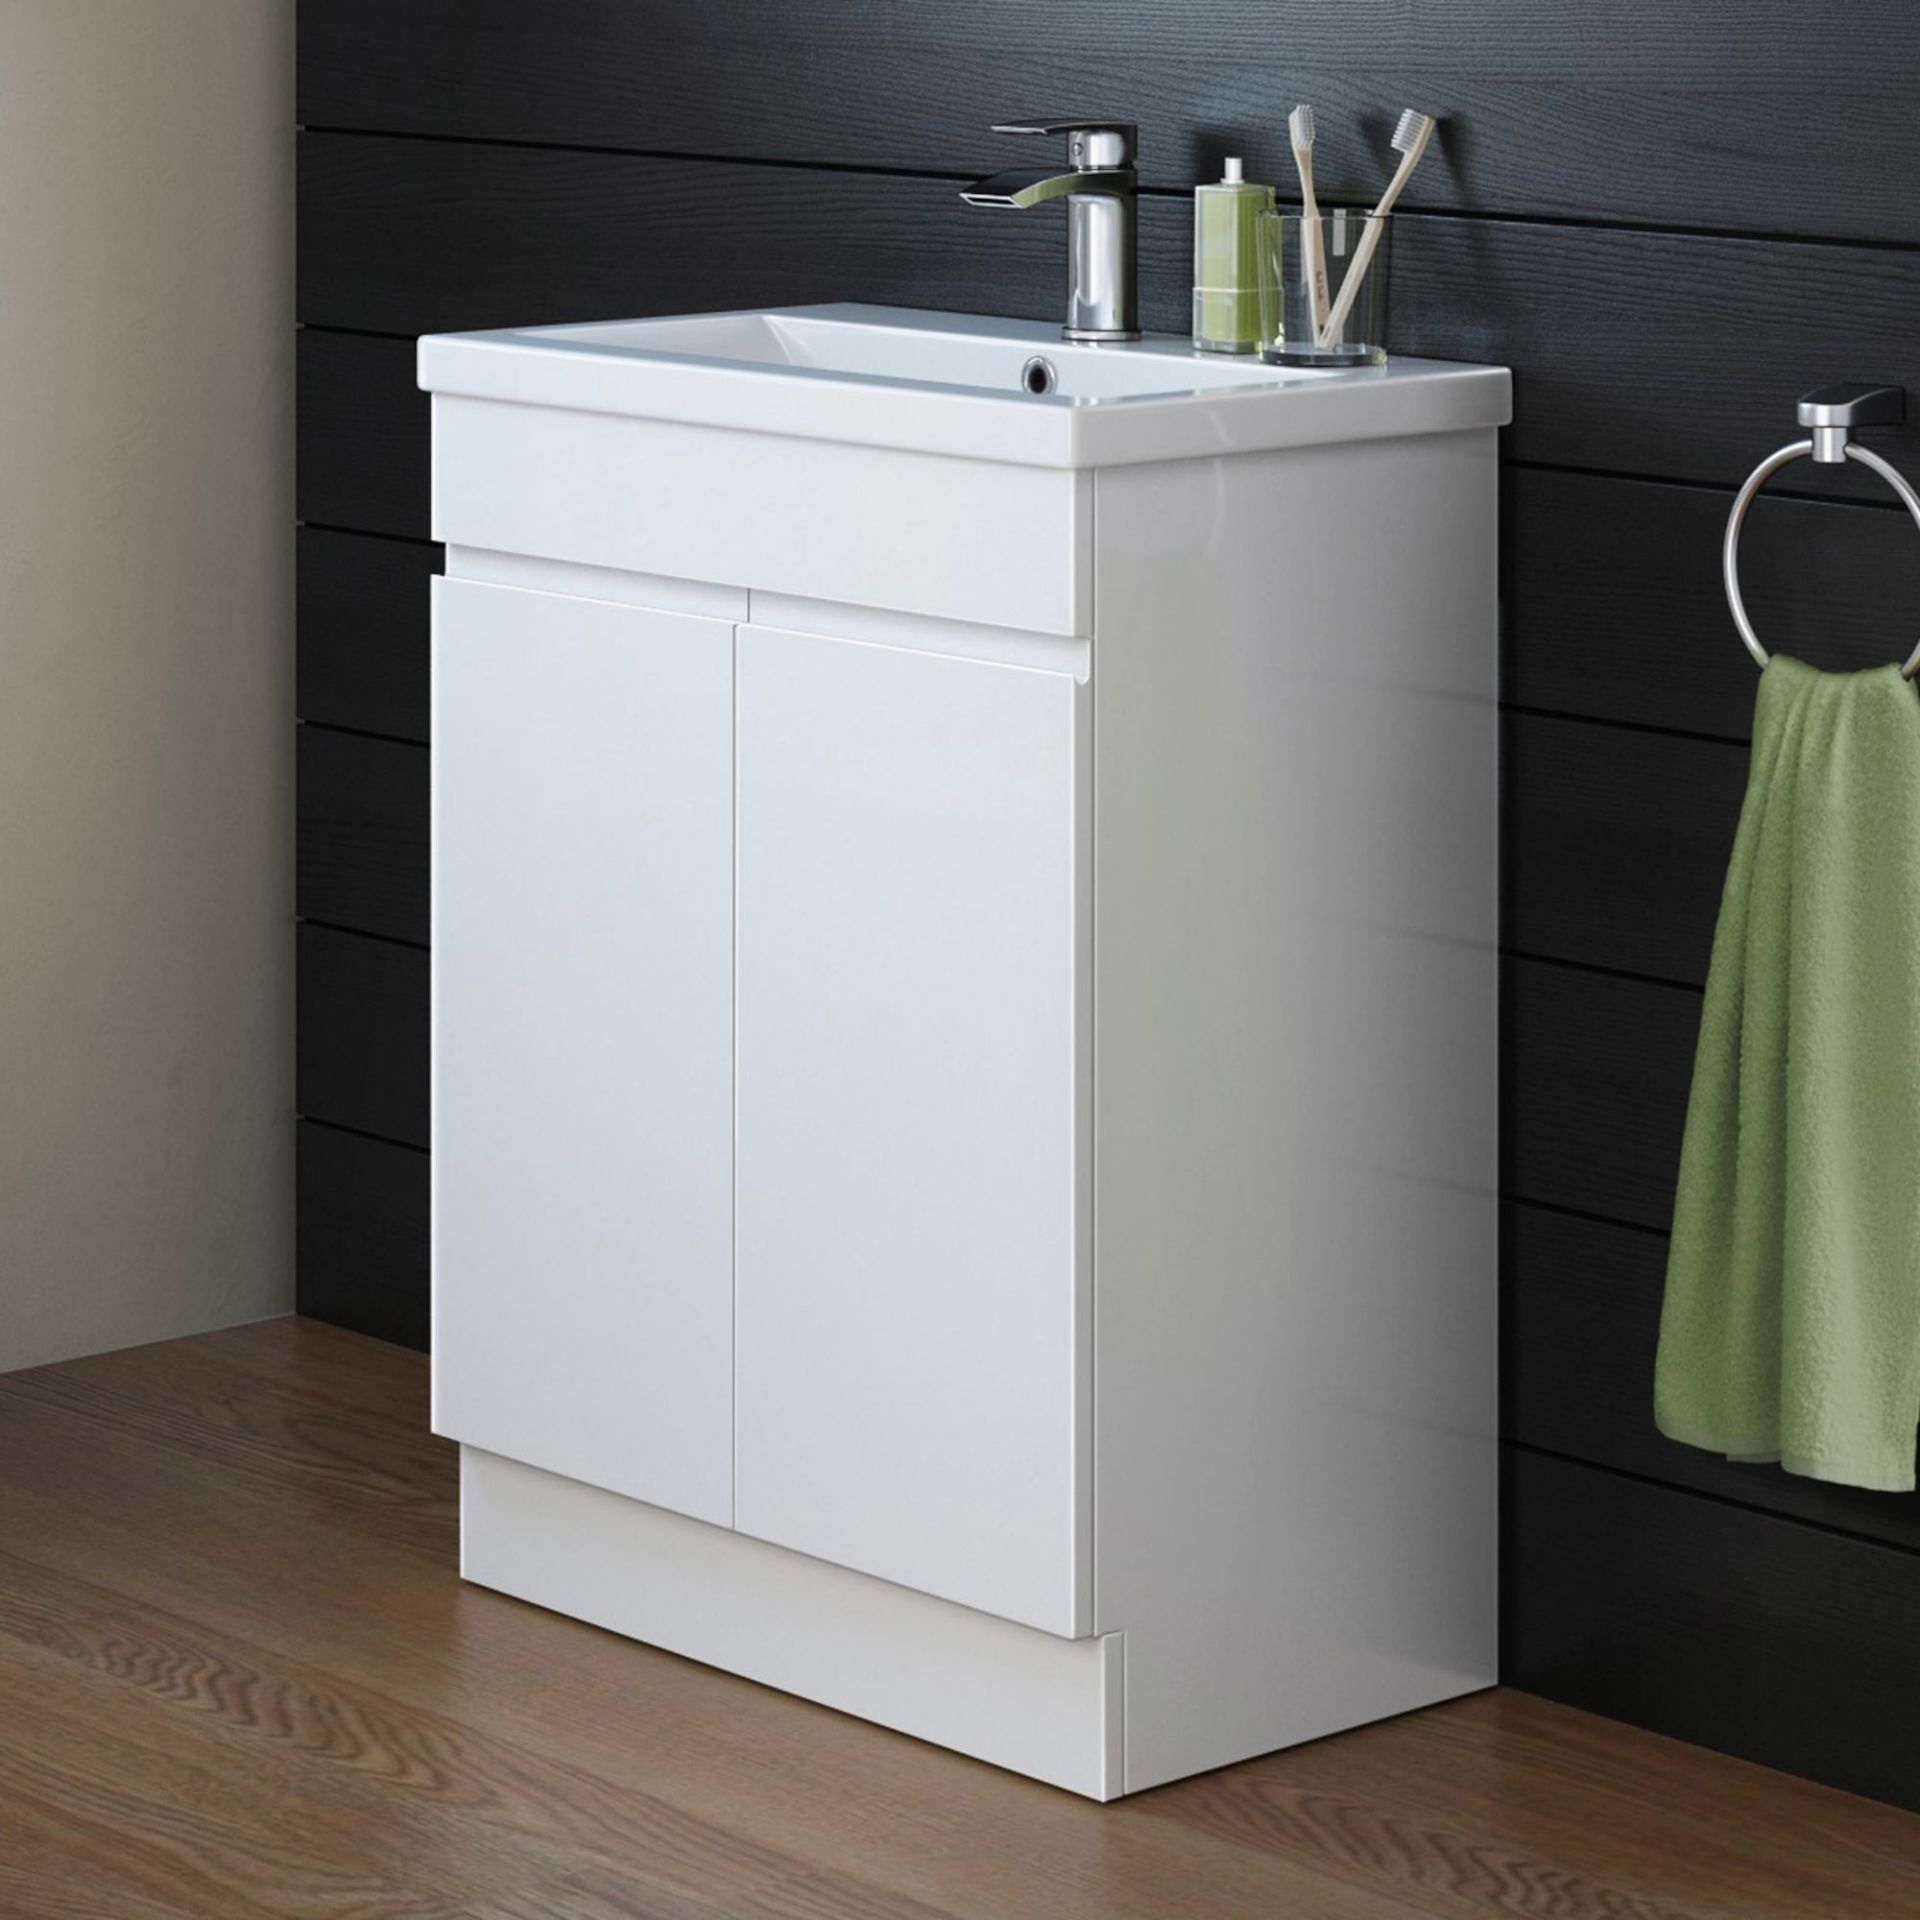 BRAND NEW & BOXED 600mm Trent Gloss White Sink Cabinet - Floor Standing. RRP £499.99.